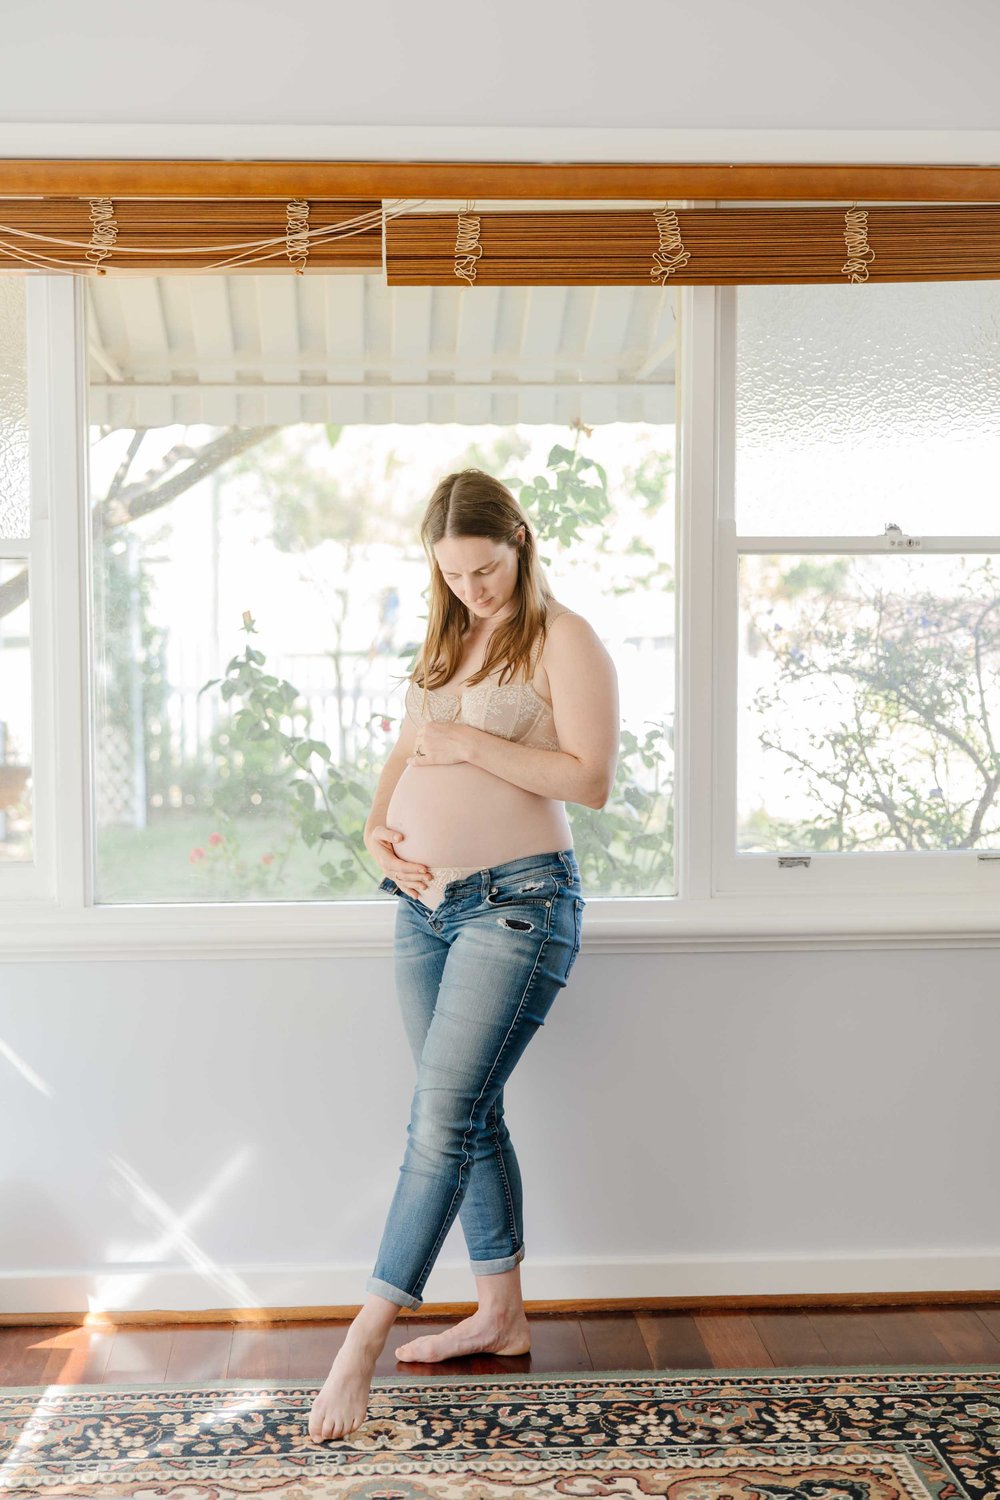 Perth_in_home_photographer_maternity_021.jpg